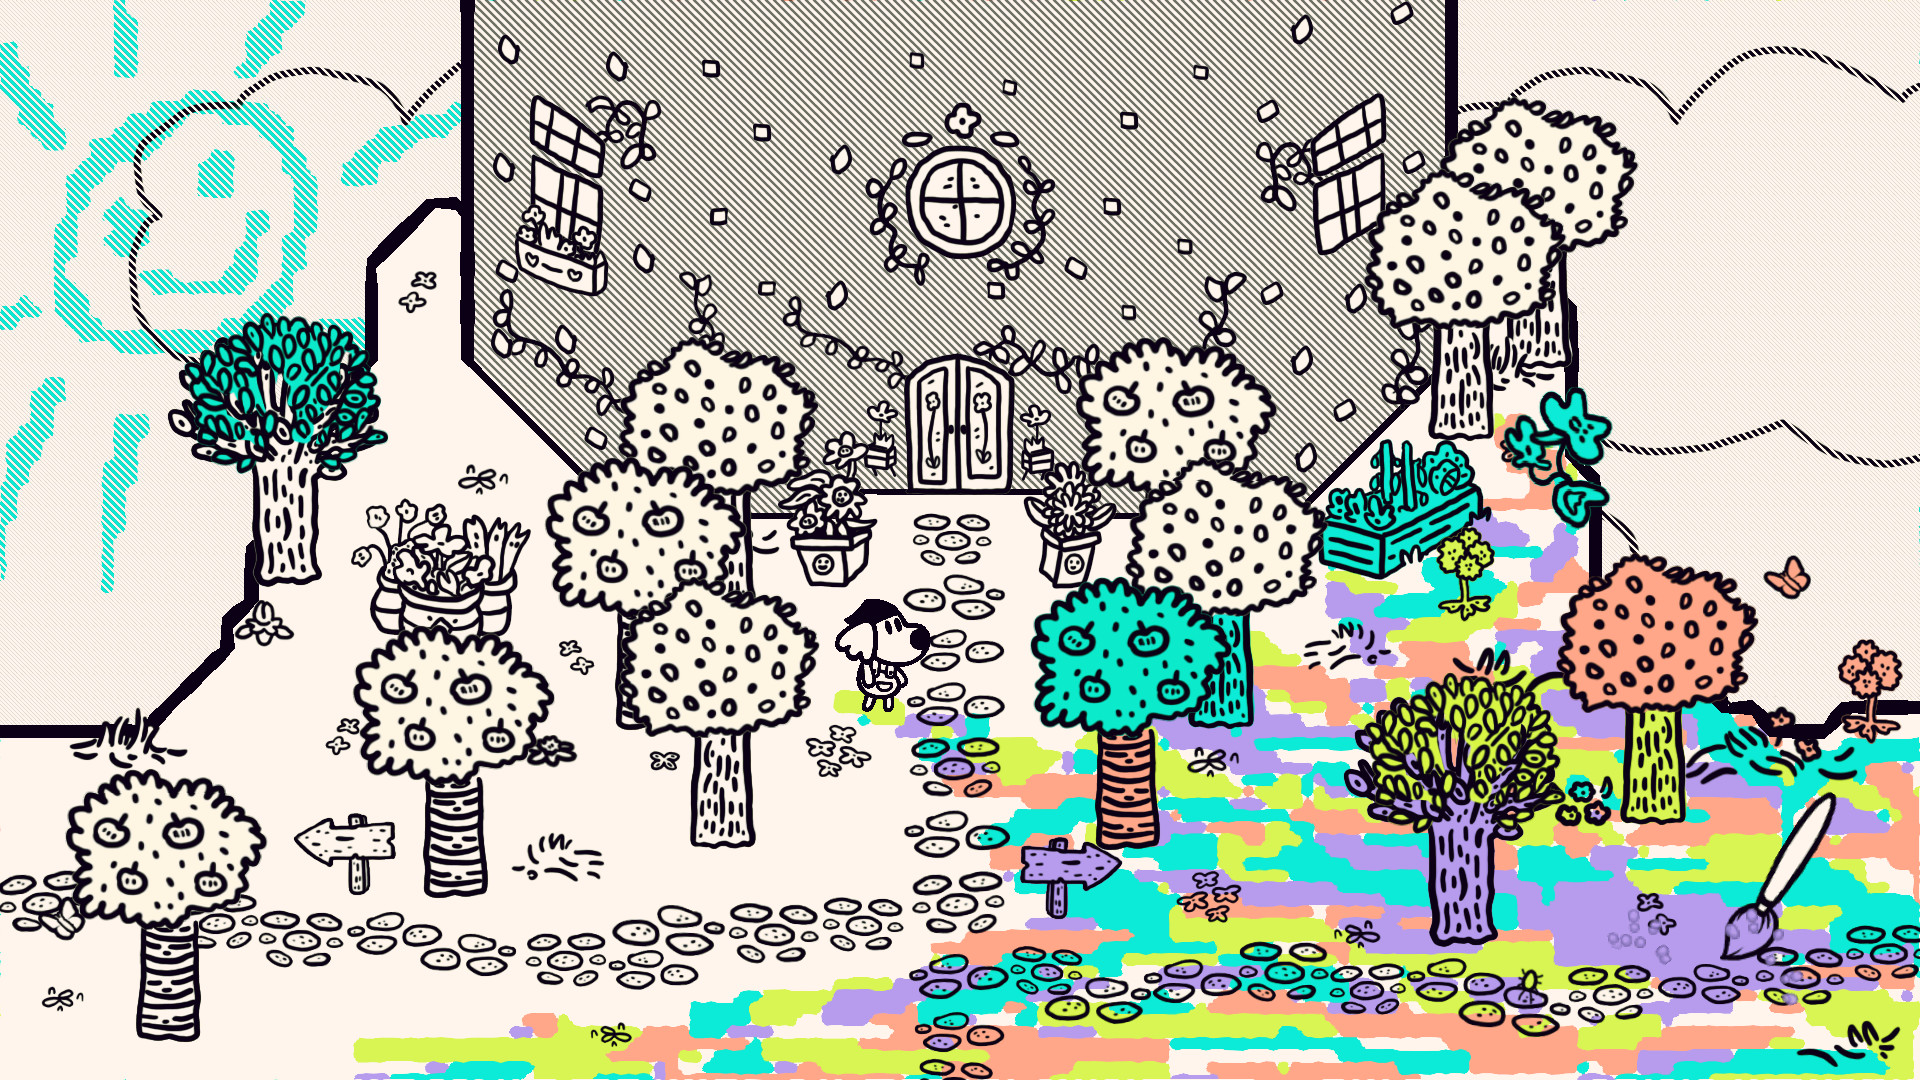 Chicory: A Colorful Tale Steam Altergift